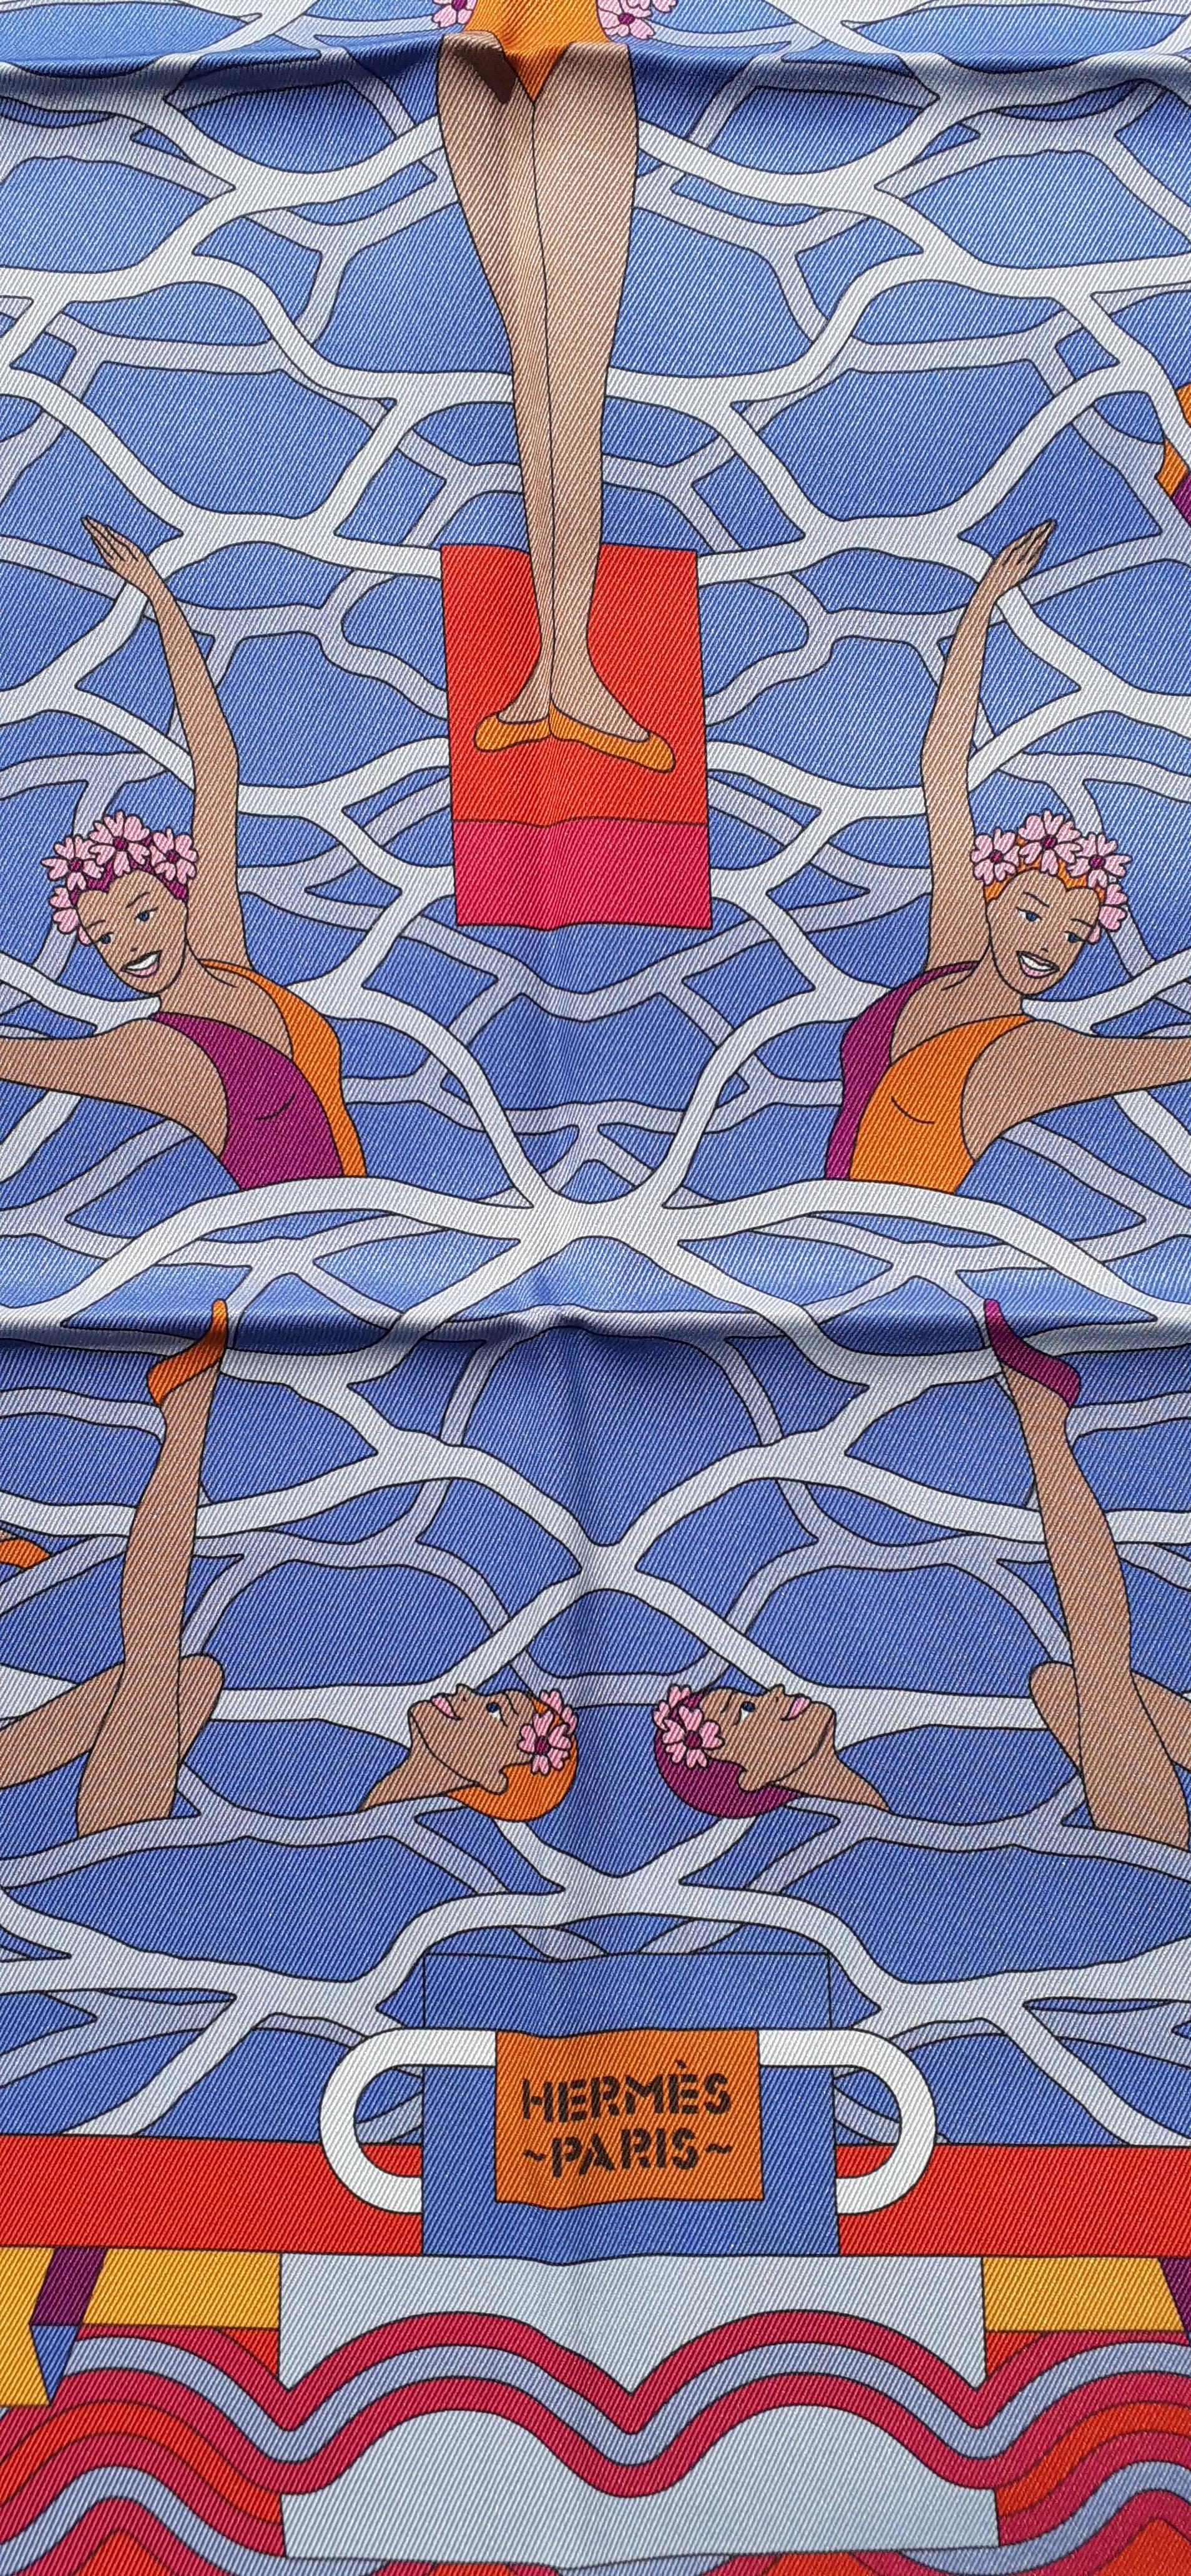 Highly Sought After Authentic Hermès Scarf

Pattern: 